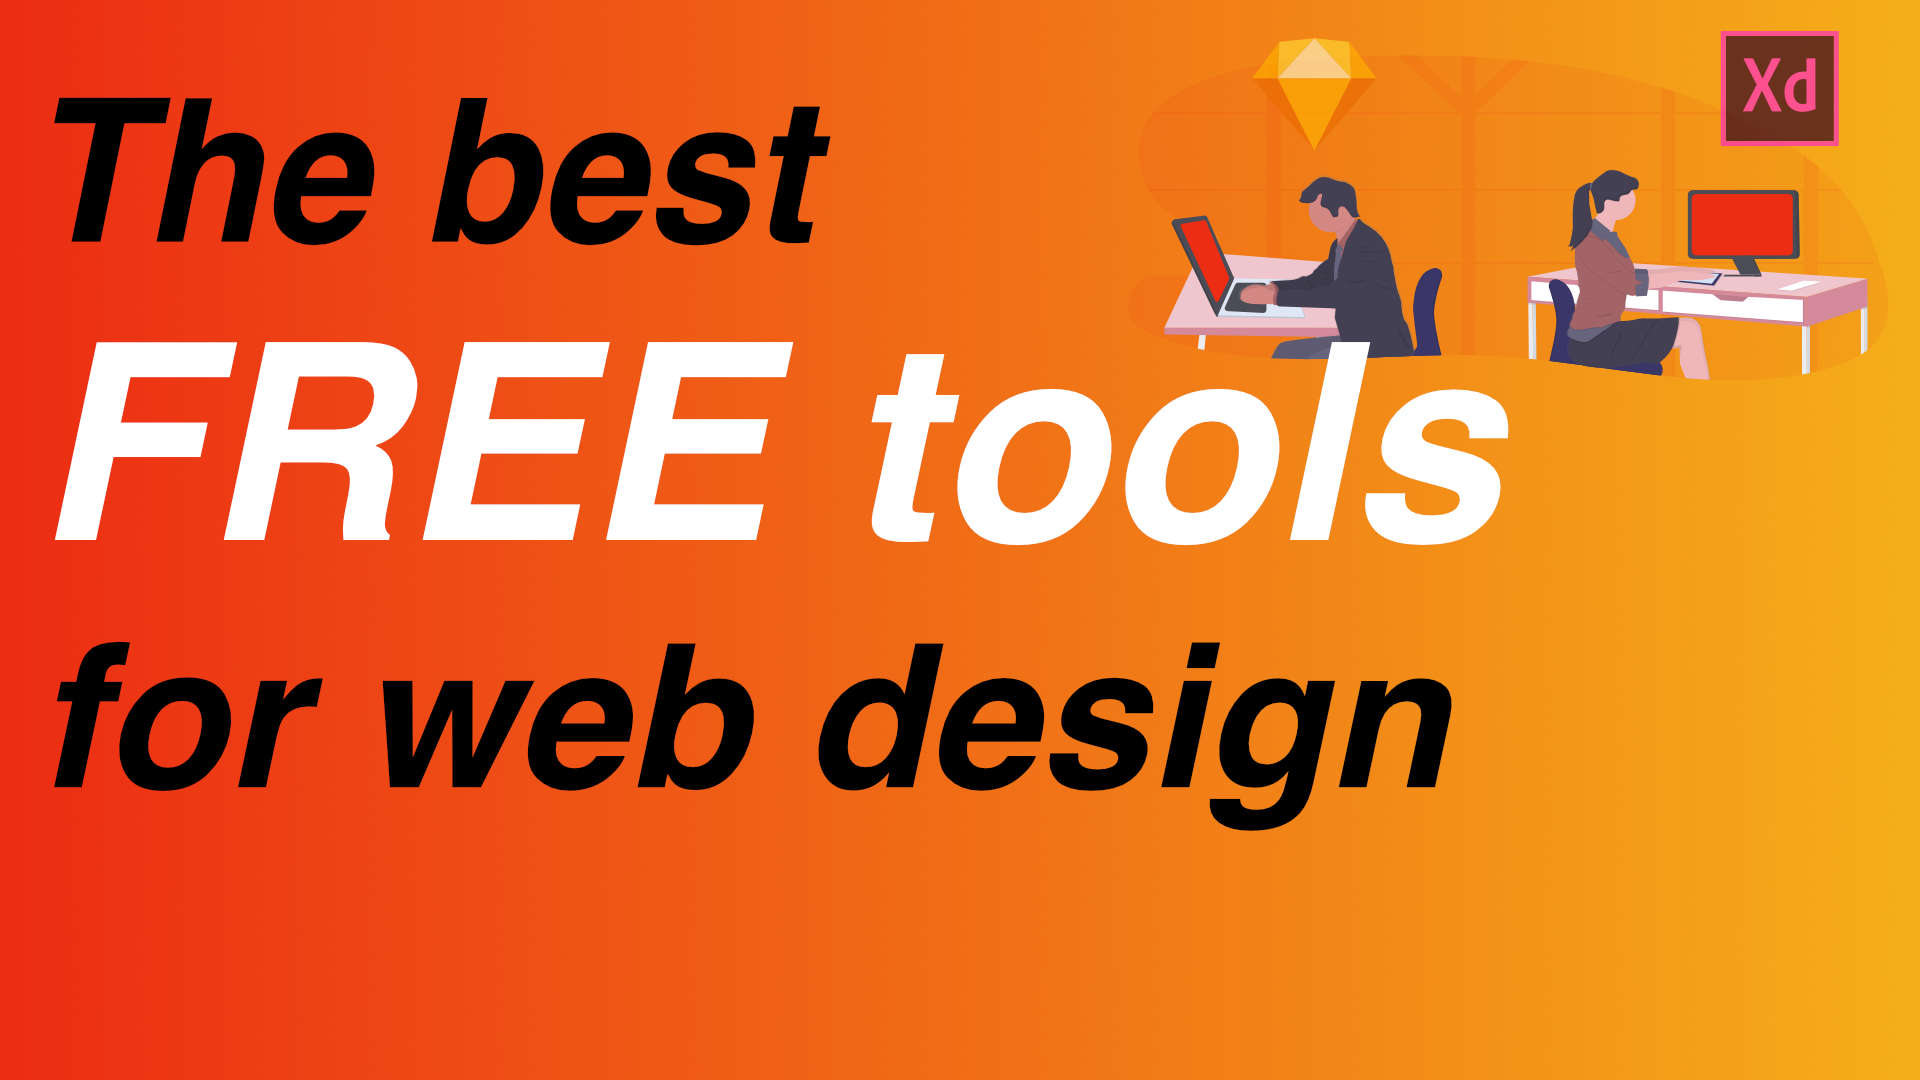 Best free tools for web design